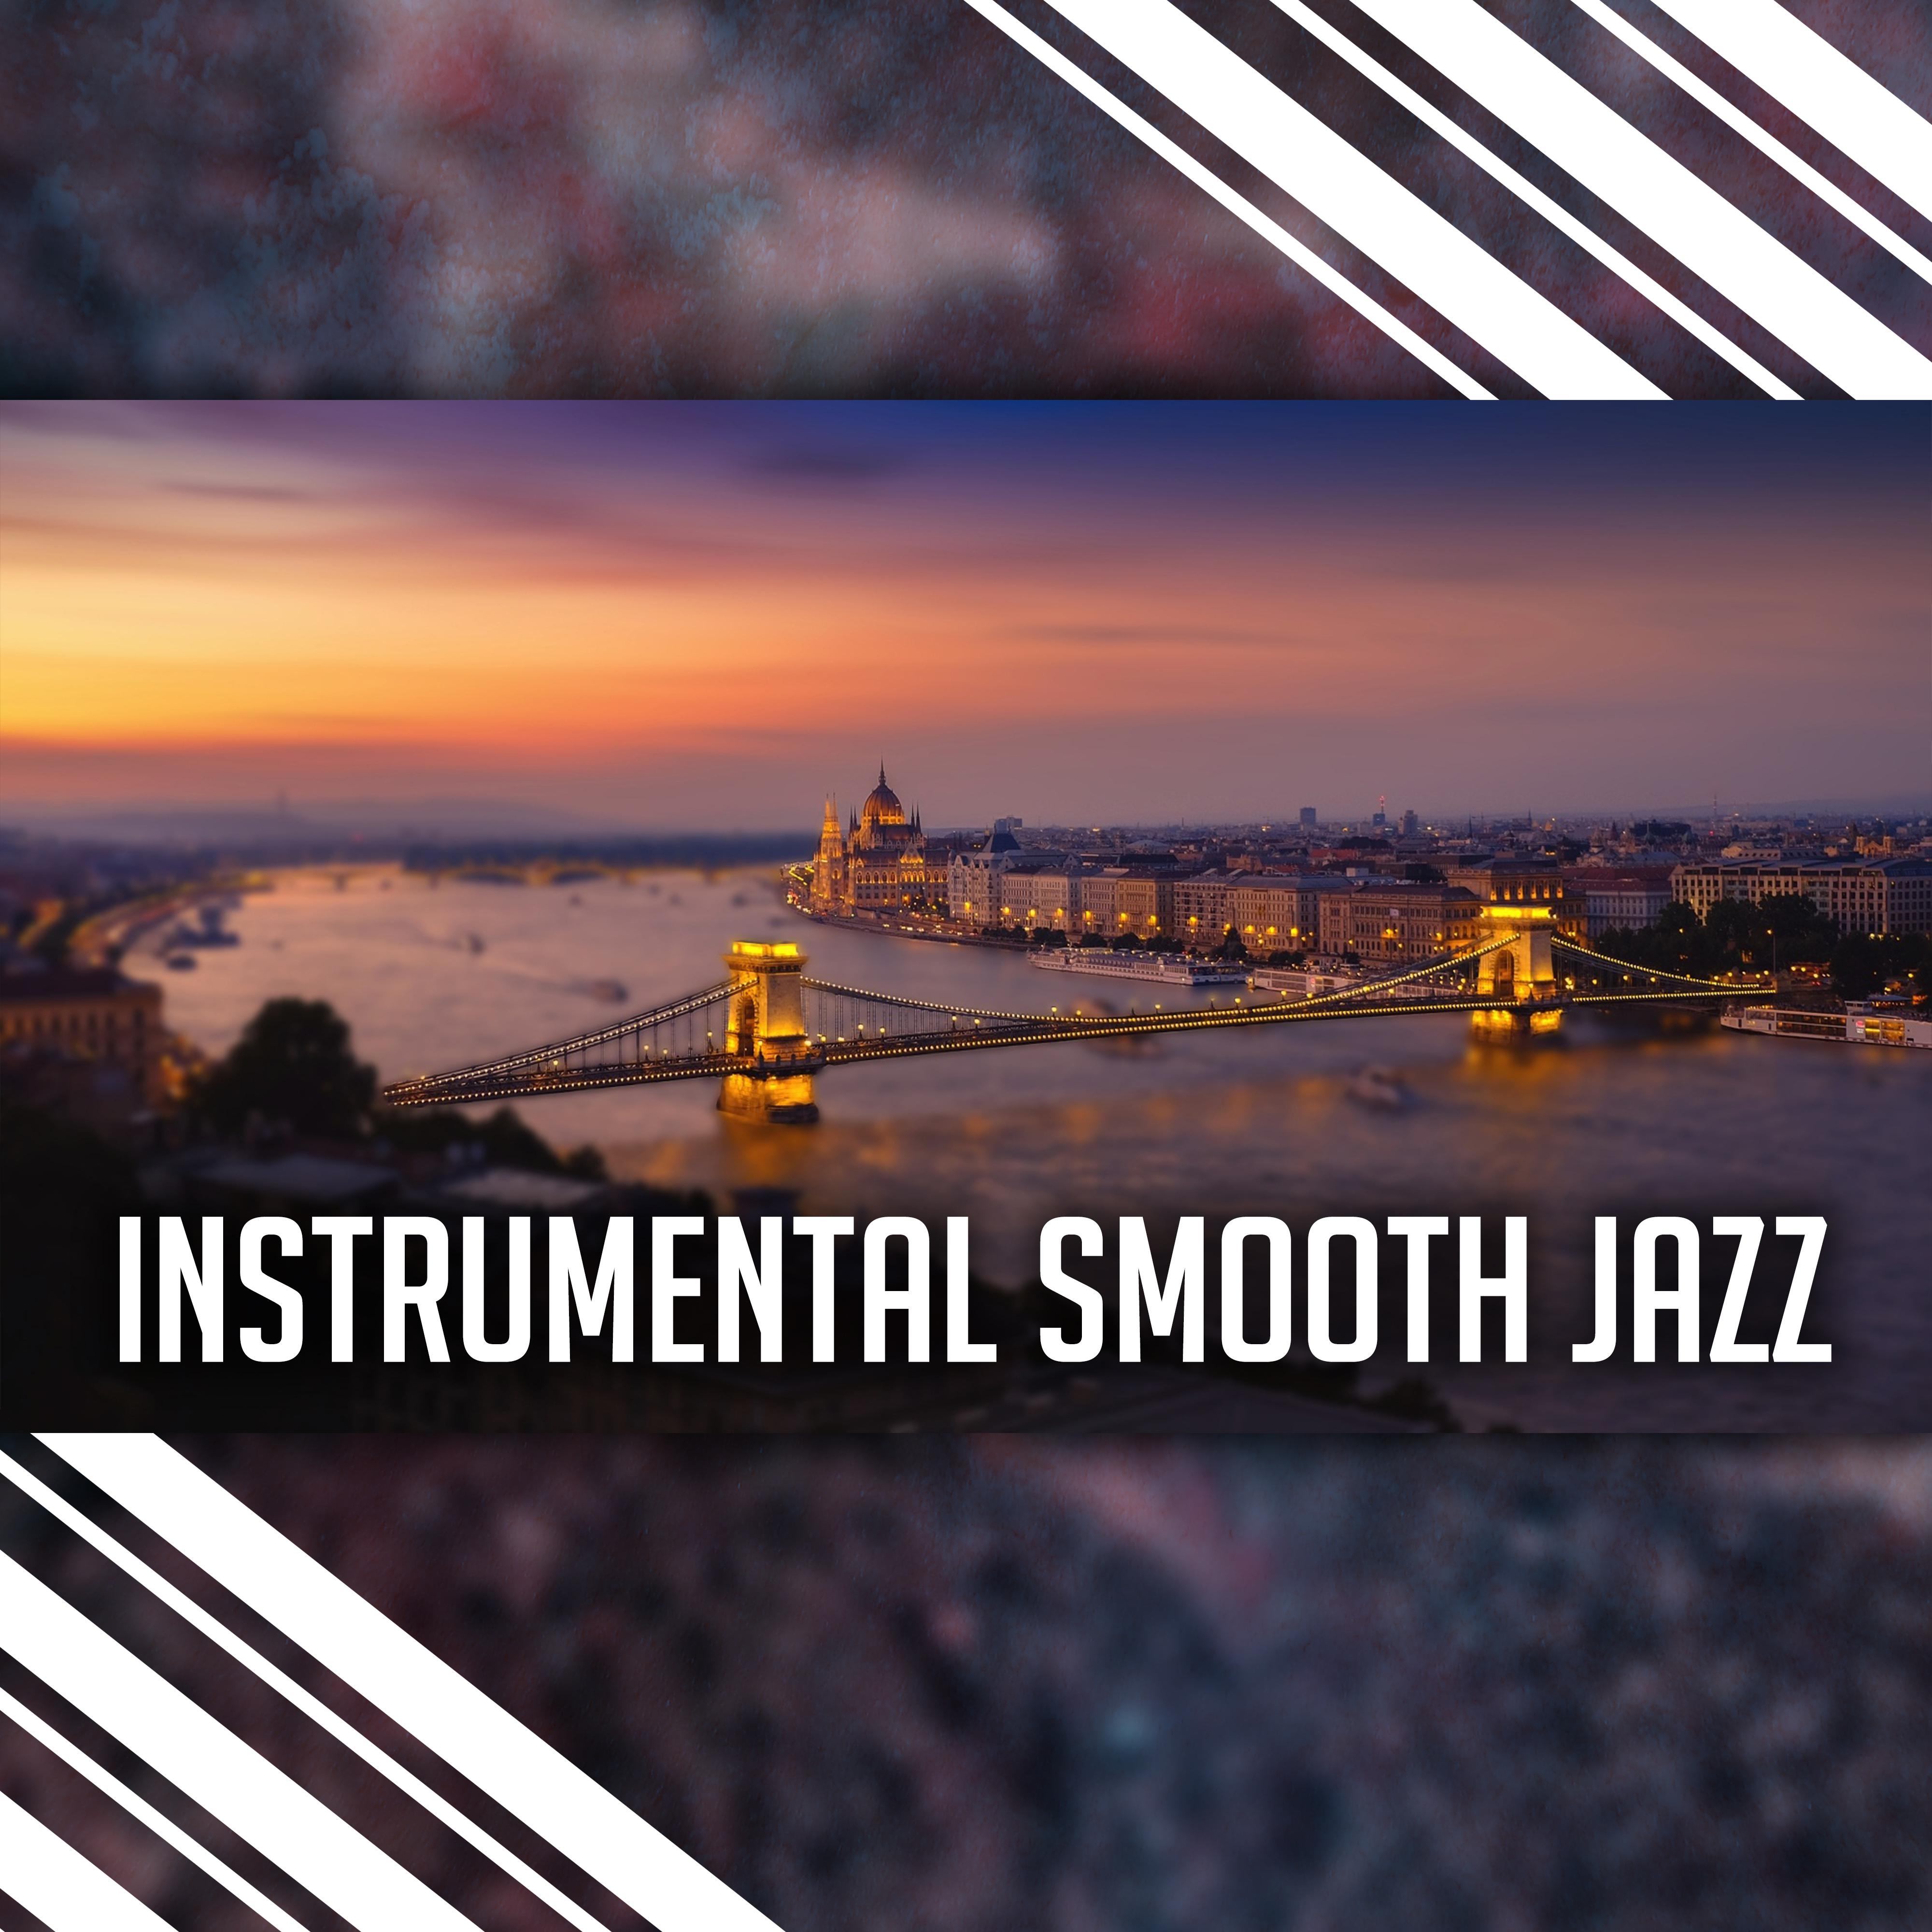 Instrumental Smooth Jazz  Calming Piano Bar, Guitar Relaxation, Soft Music to Rest, Night Jazz Club